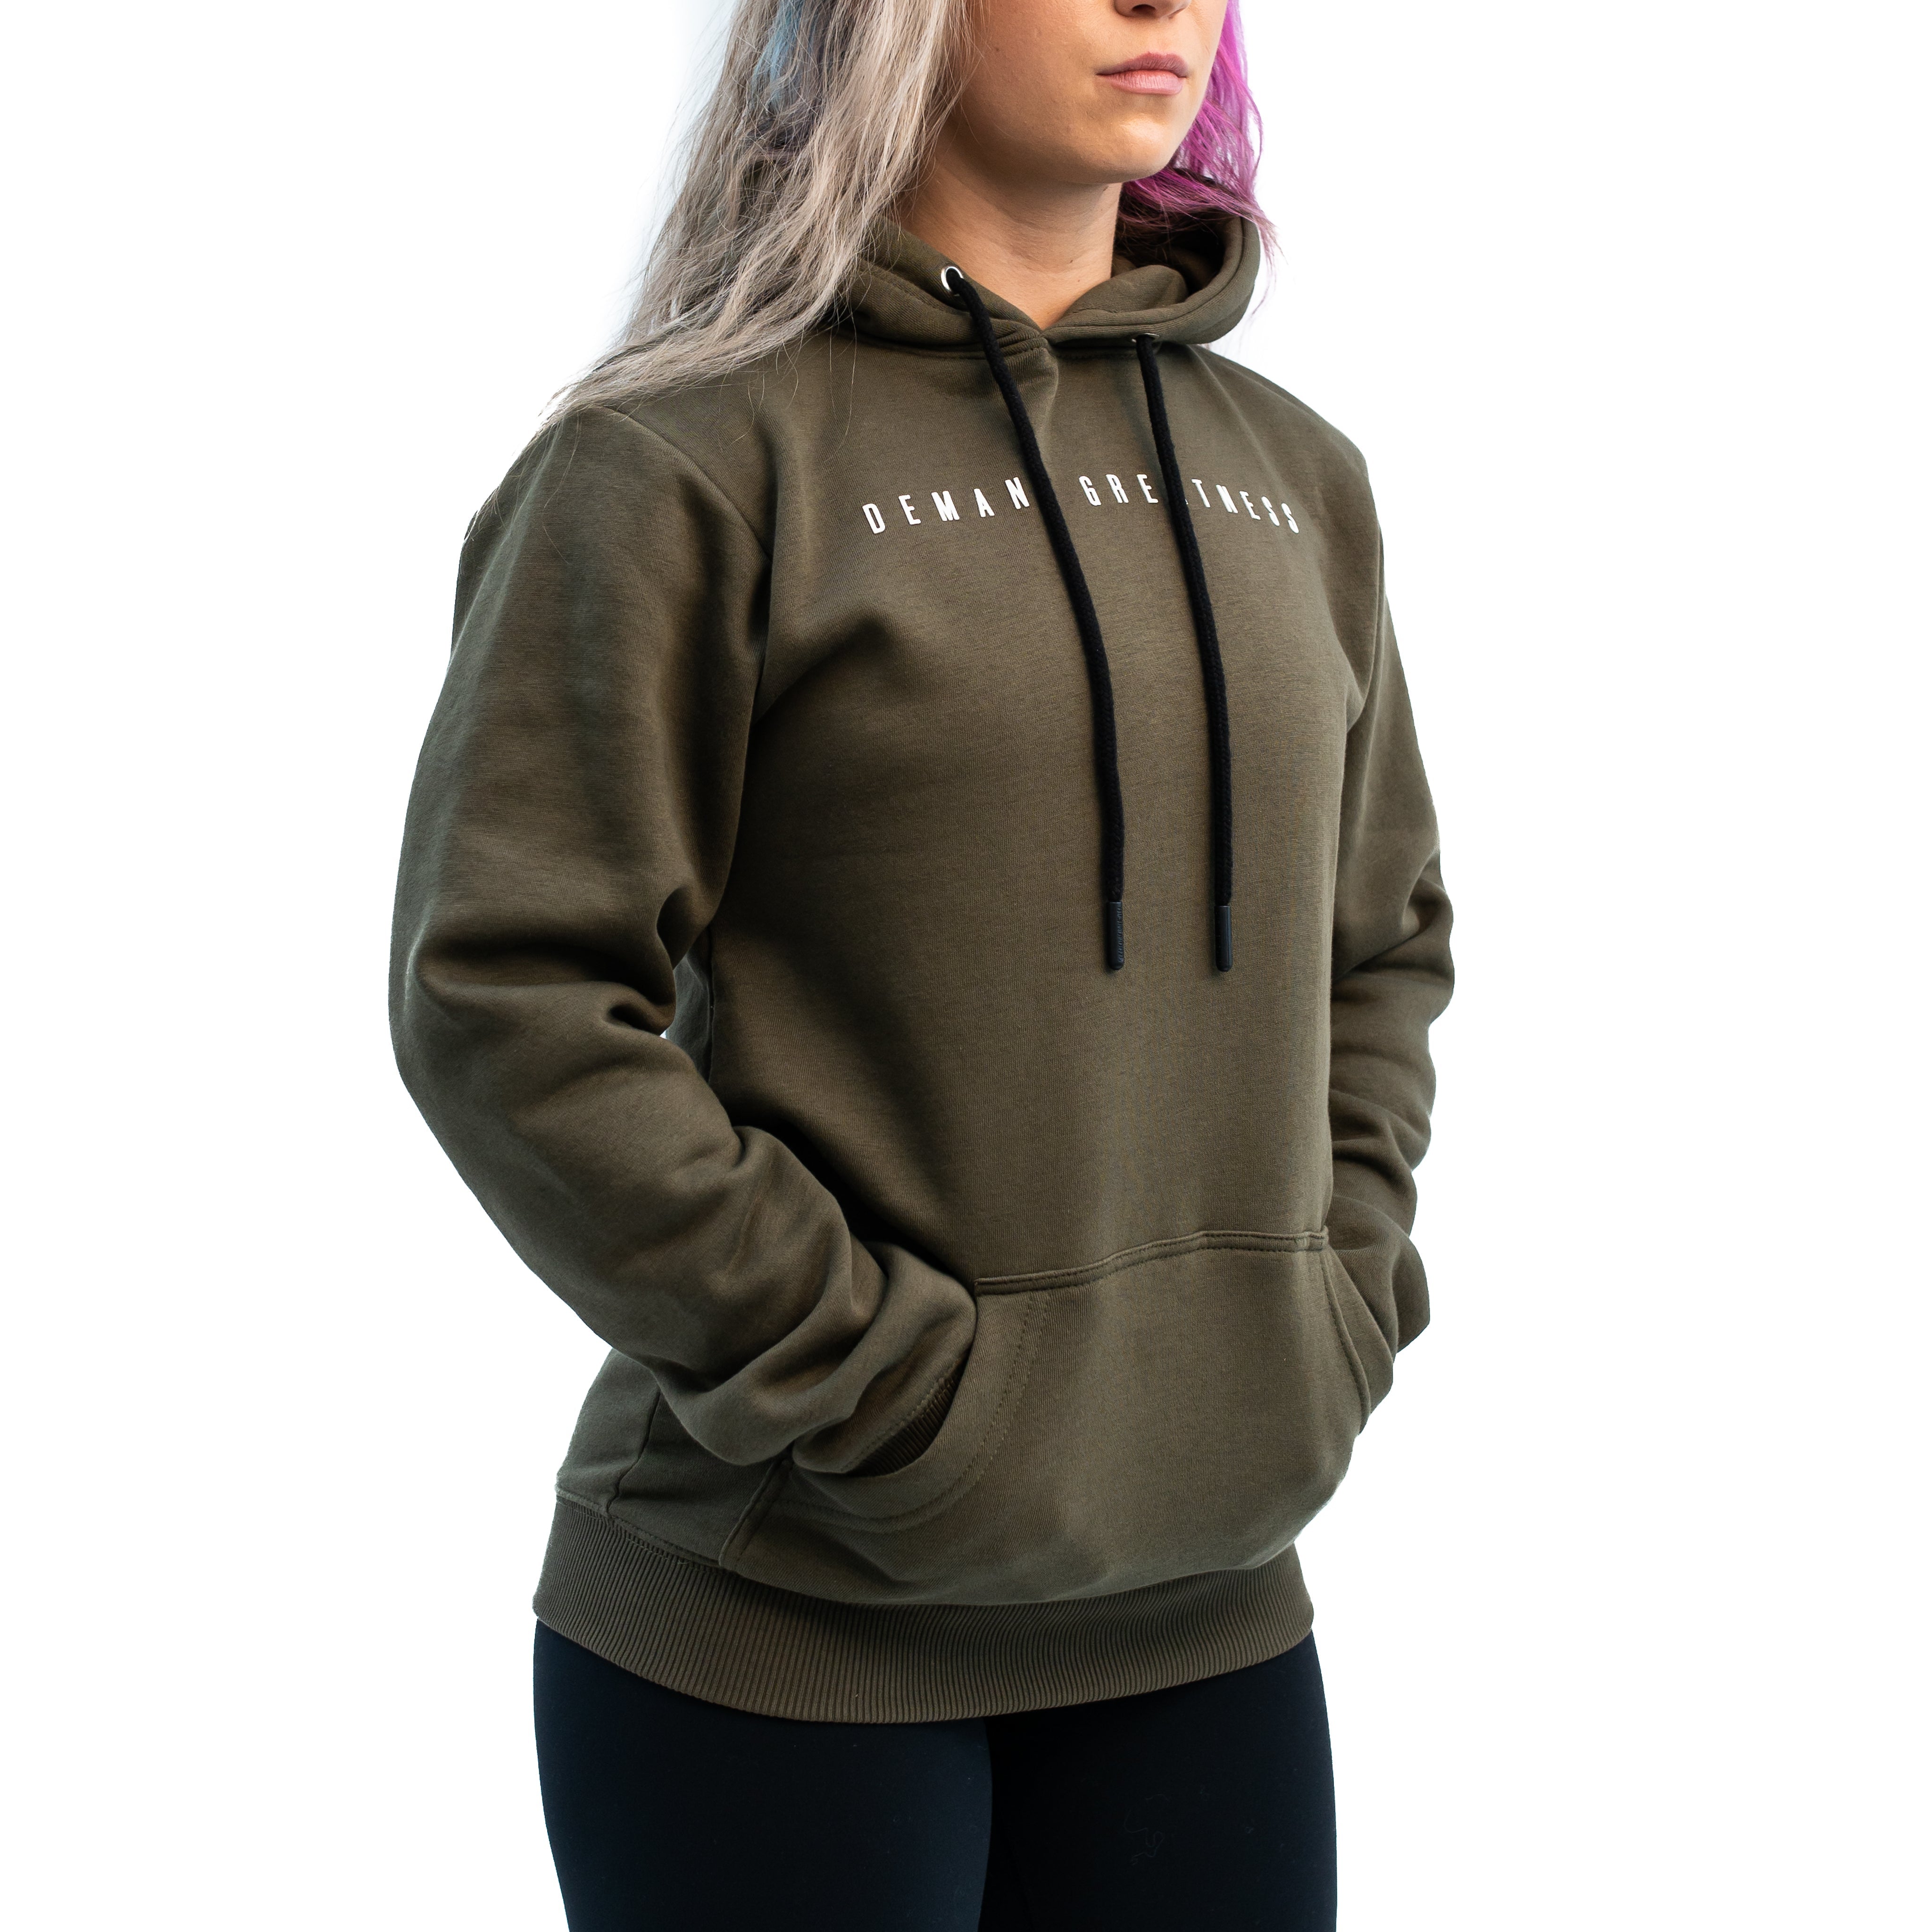 Mantra is a bar grip hoodie great for casual wear or lifting in the gym. Purchase Mantra bar grip hoodie from A7 UK. Purchase Mantra bar grip in Europe from A7 Europe. No more chalk and no more sliding. Mantra is our newest design on our bar grip hoodie. Demand Greatness on the front of the hoodie with bar grip on the back in a military colourway! A7UK supplies the best Powerlifting apparel for all workouts. Available in UK and Europe including France, Italy, Germany, the Netherlands, Sweden and Poland.